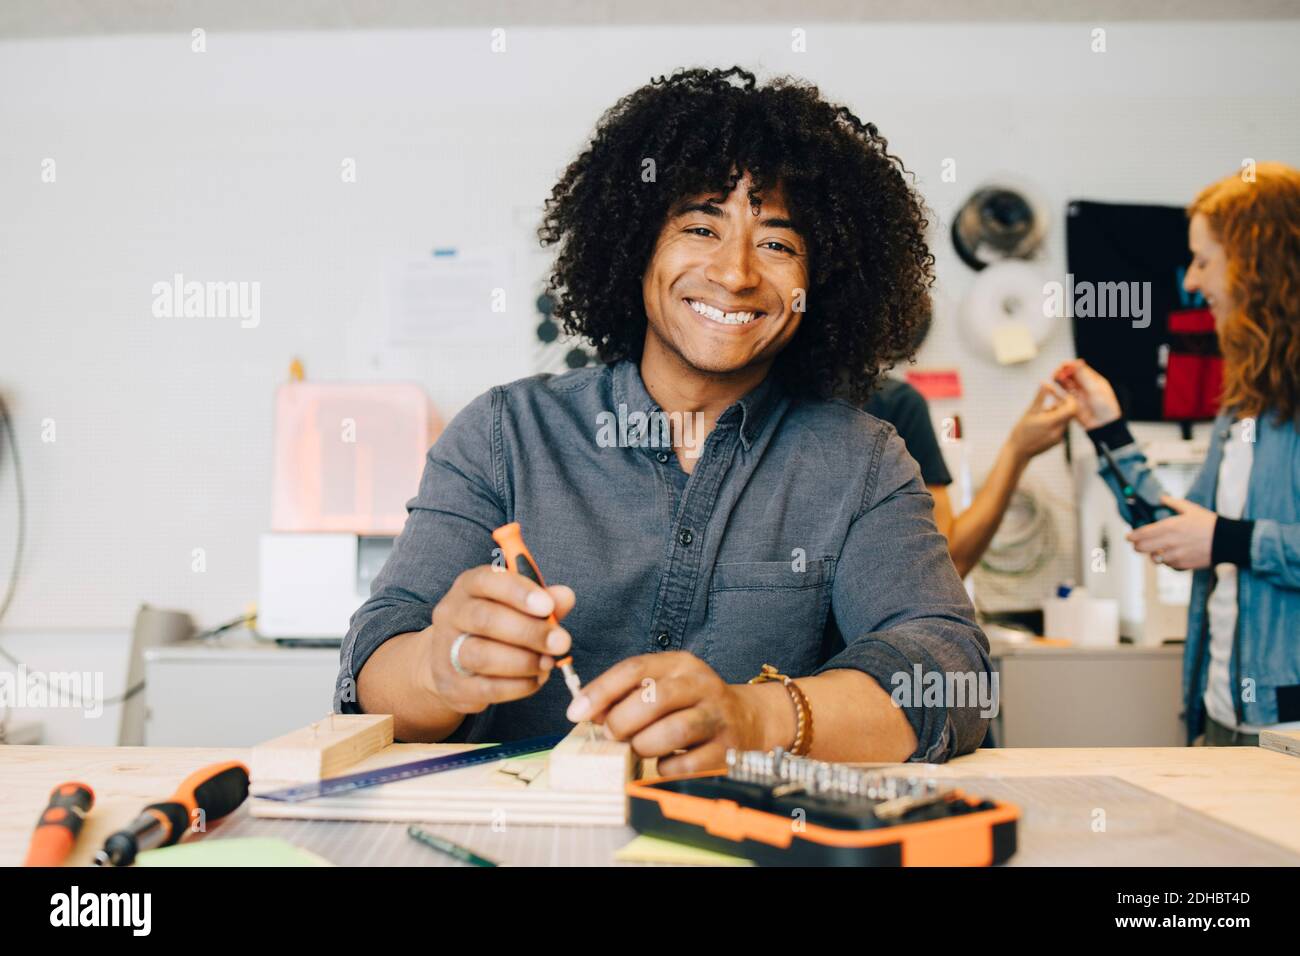 Portrait of smiling male technician using tool on wood at workbench in creative office Stock Photo